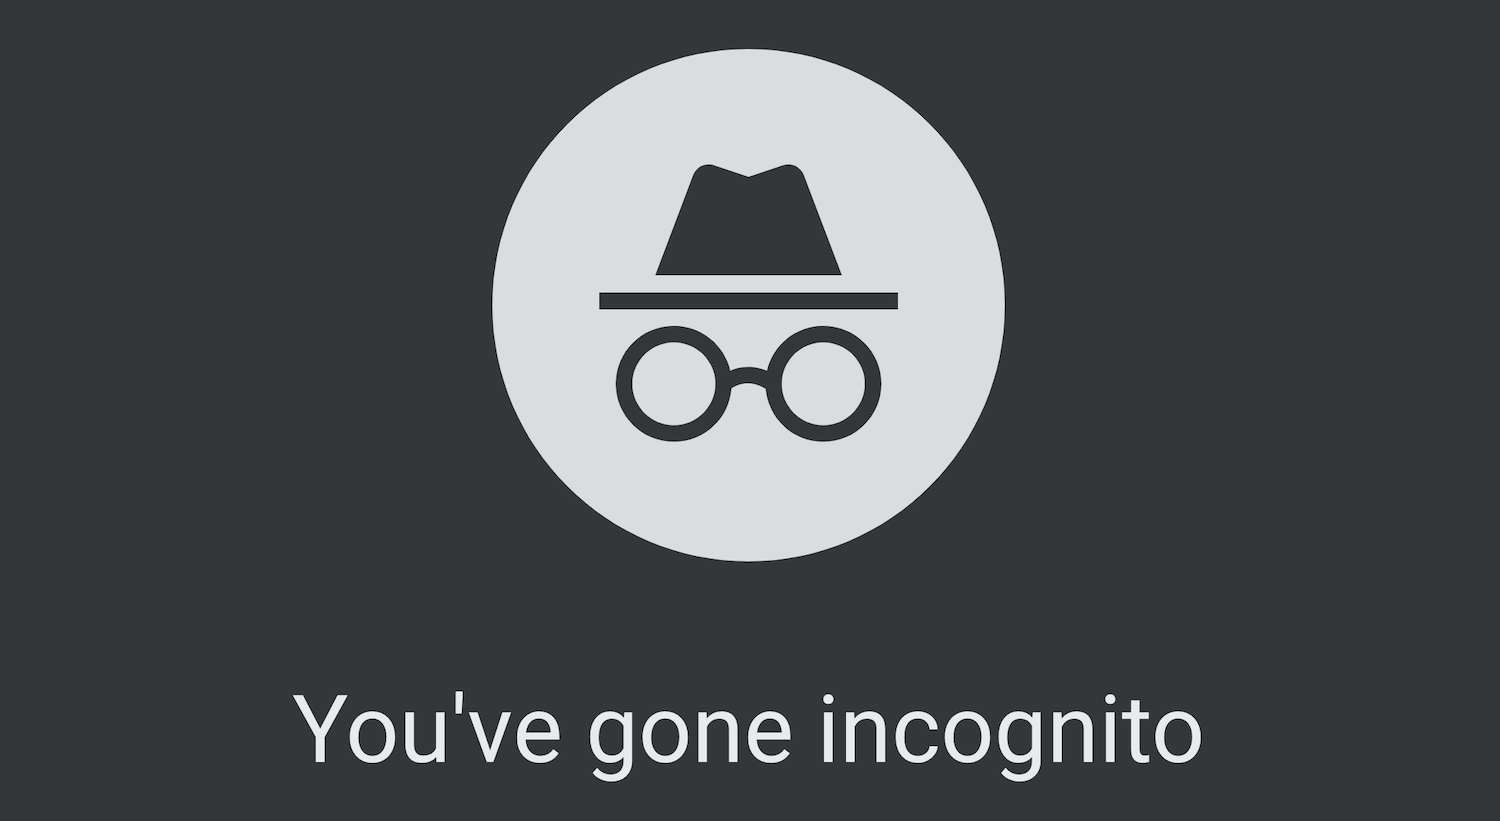 New $5 billion lawsuit accuses Google of tracking users in Incognito Mode